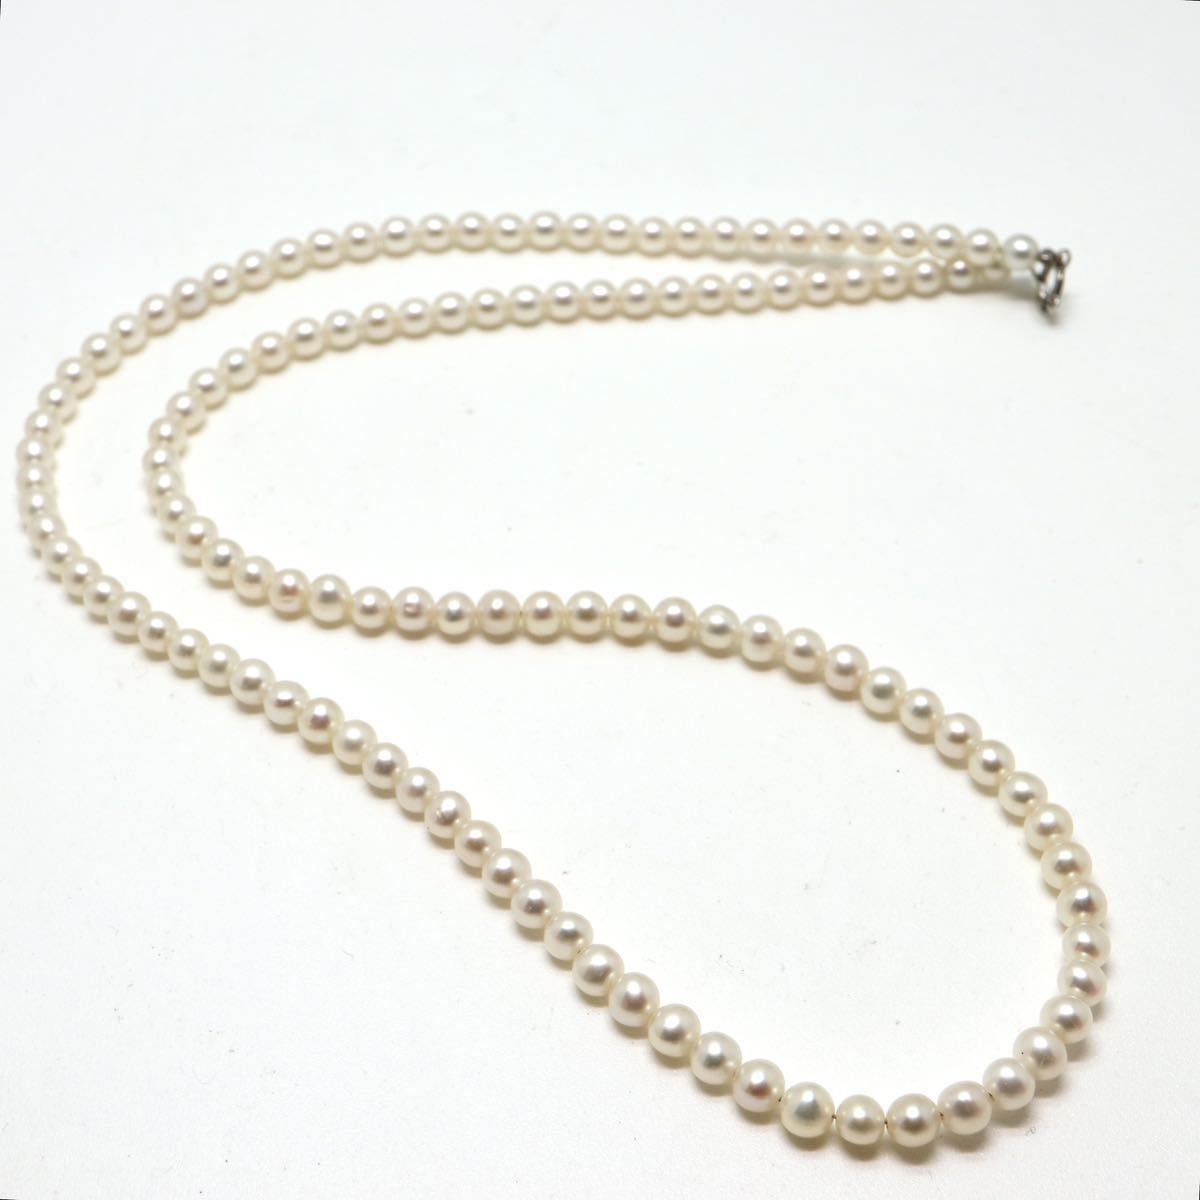 《K18WG淡水パールネックレス》J 12.5g 50cm 4.0-4.5mm珠 ベビーパール pearl necklace ジュエリー jewelry EA2/EB0_画像5